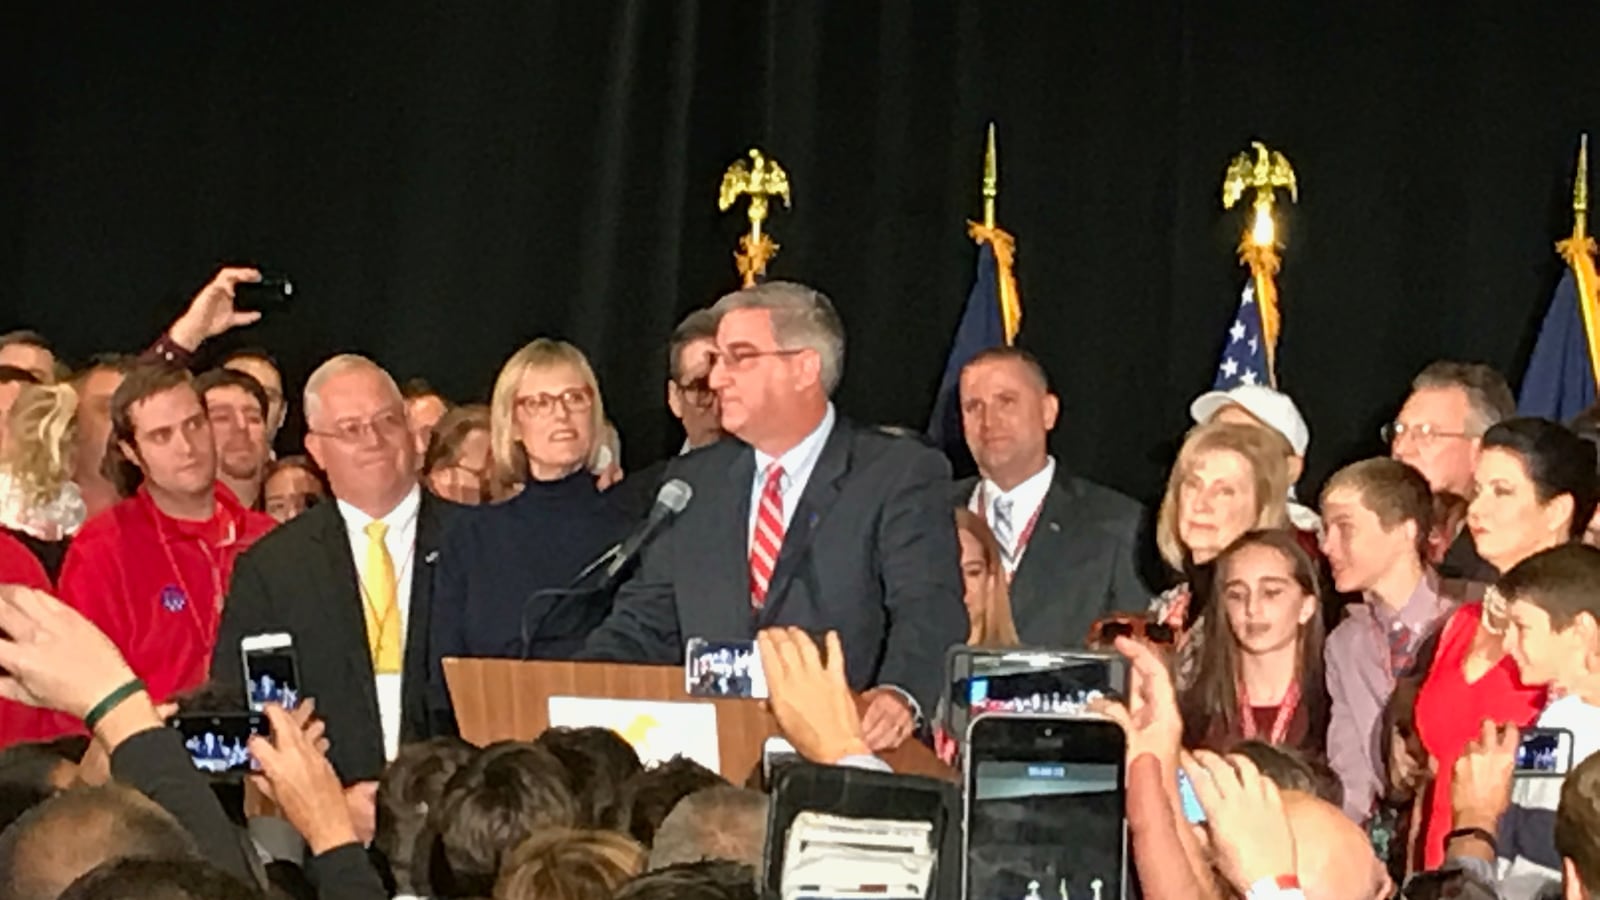 Governor-Elect Eric Holcomb speaks to Republican supporters at an Election night event.